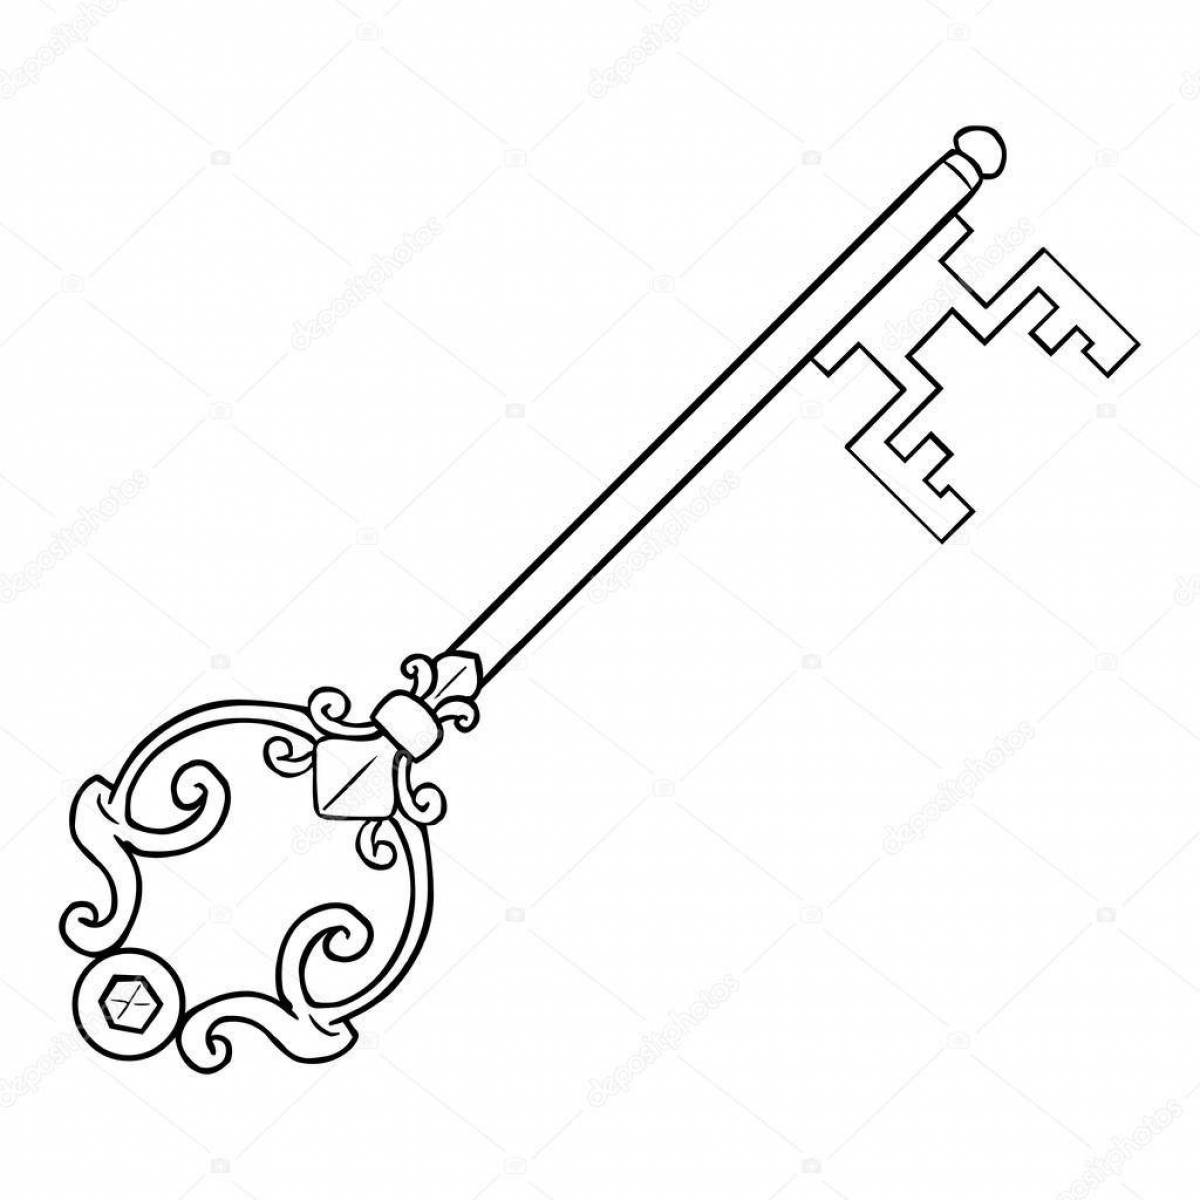 Glowing golden key coloring page